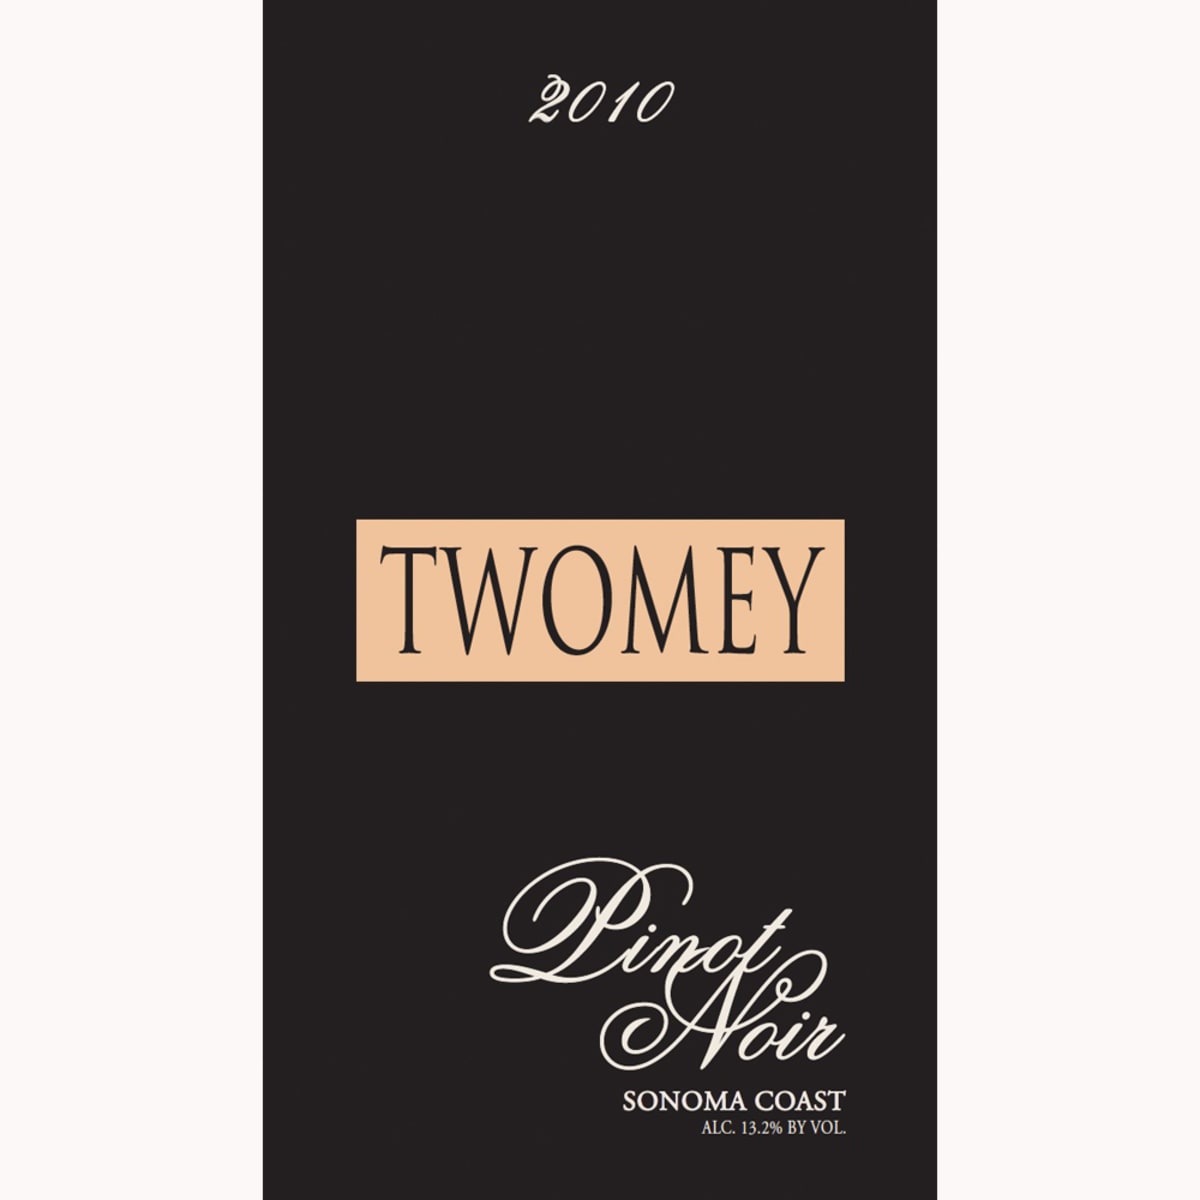 Twomey Sonoma Coast Pinot Noir 2010 Front Label